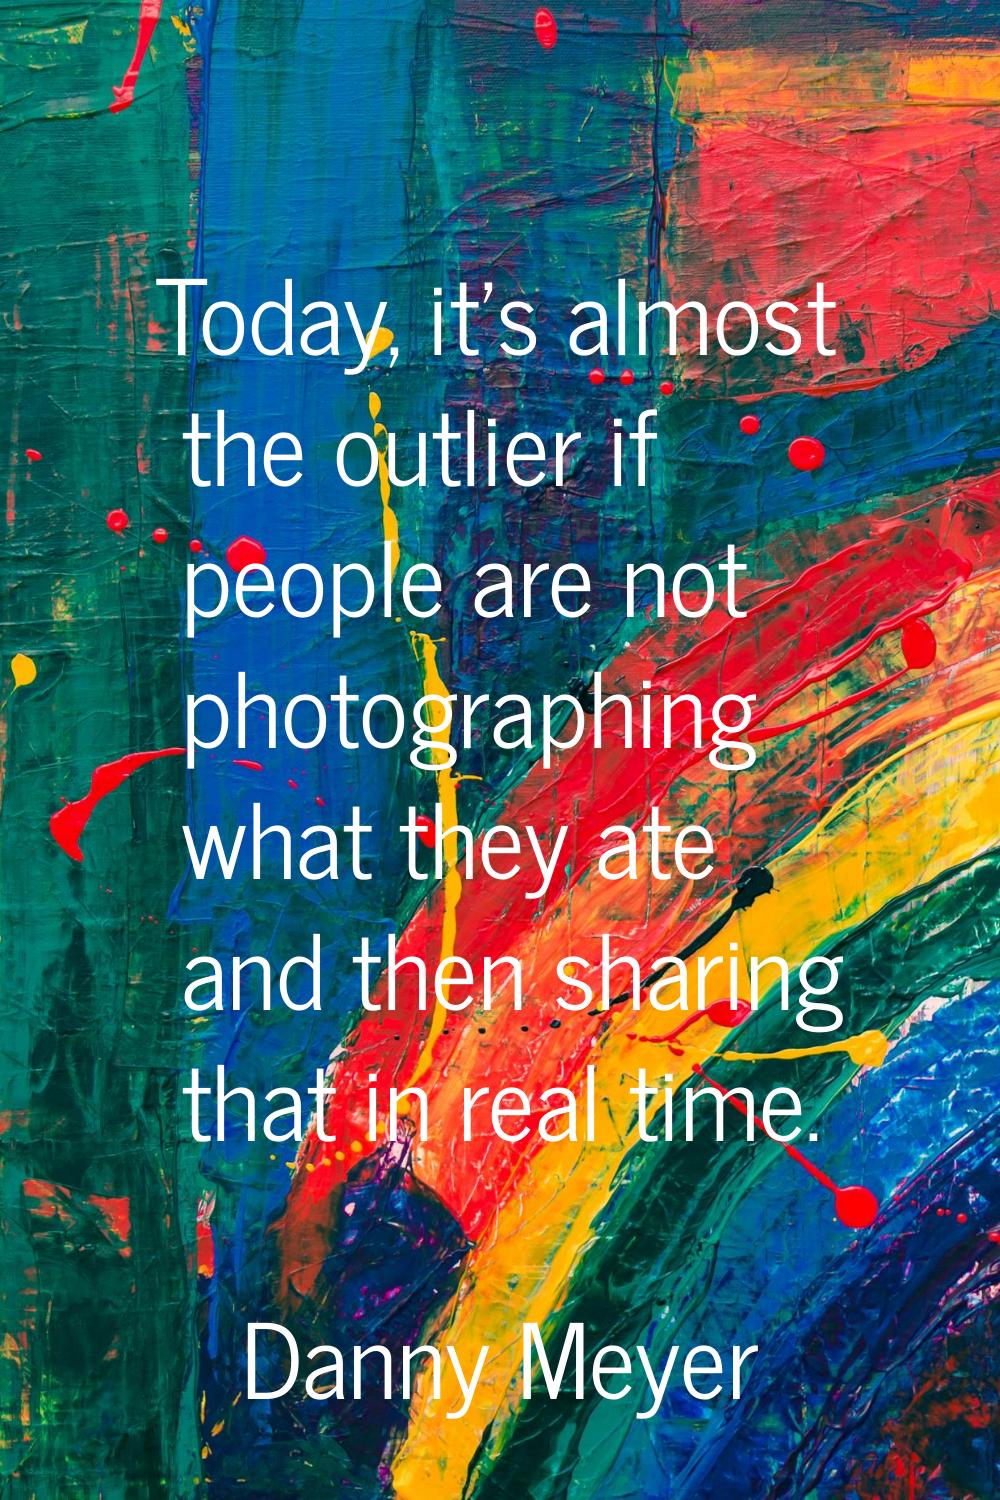 Today, it's almost the outlier if people are not photographing what they ate and then sharing that 